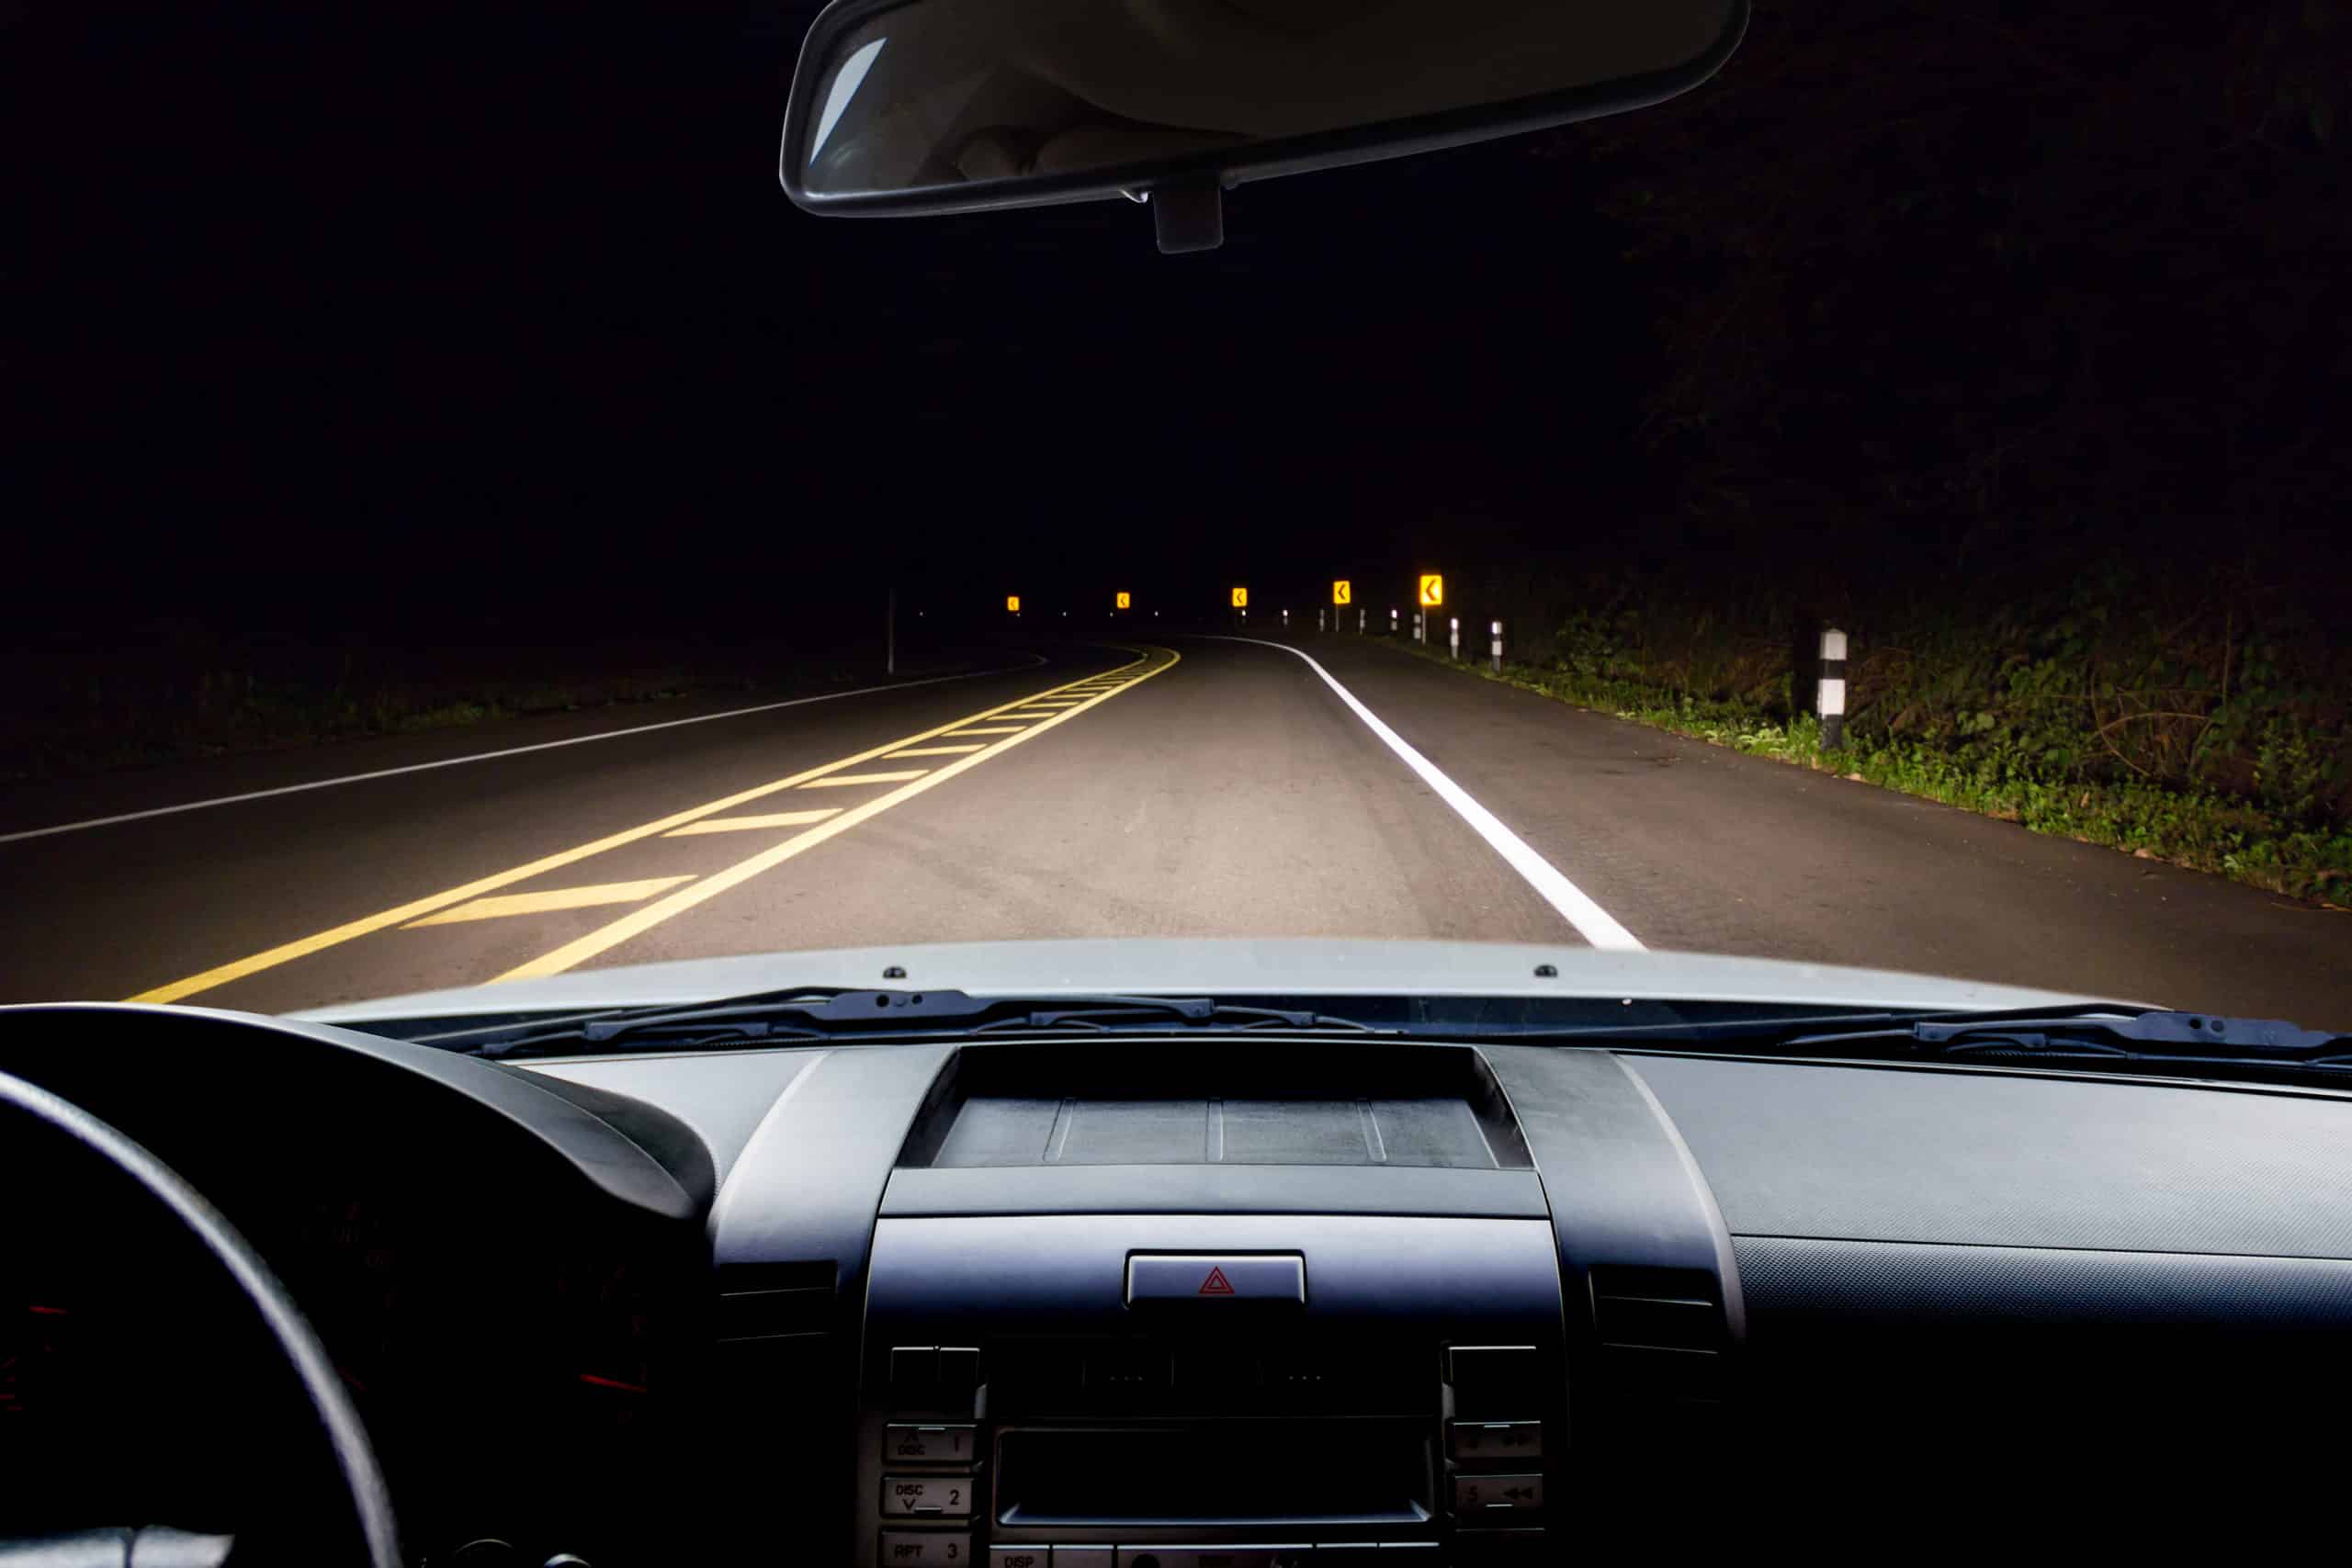 The danger of Texas roads increases during the nighttime with higher rates of fatal car accidents.